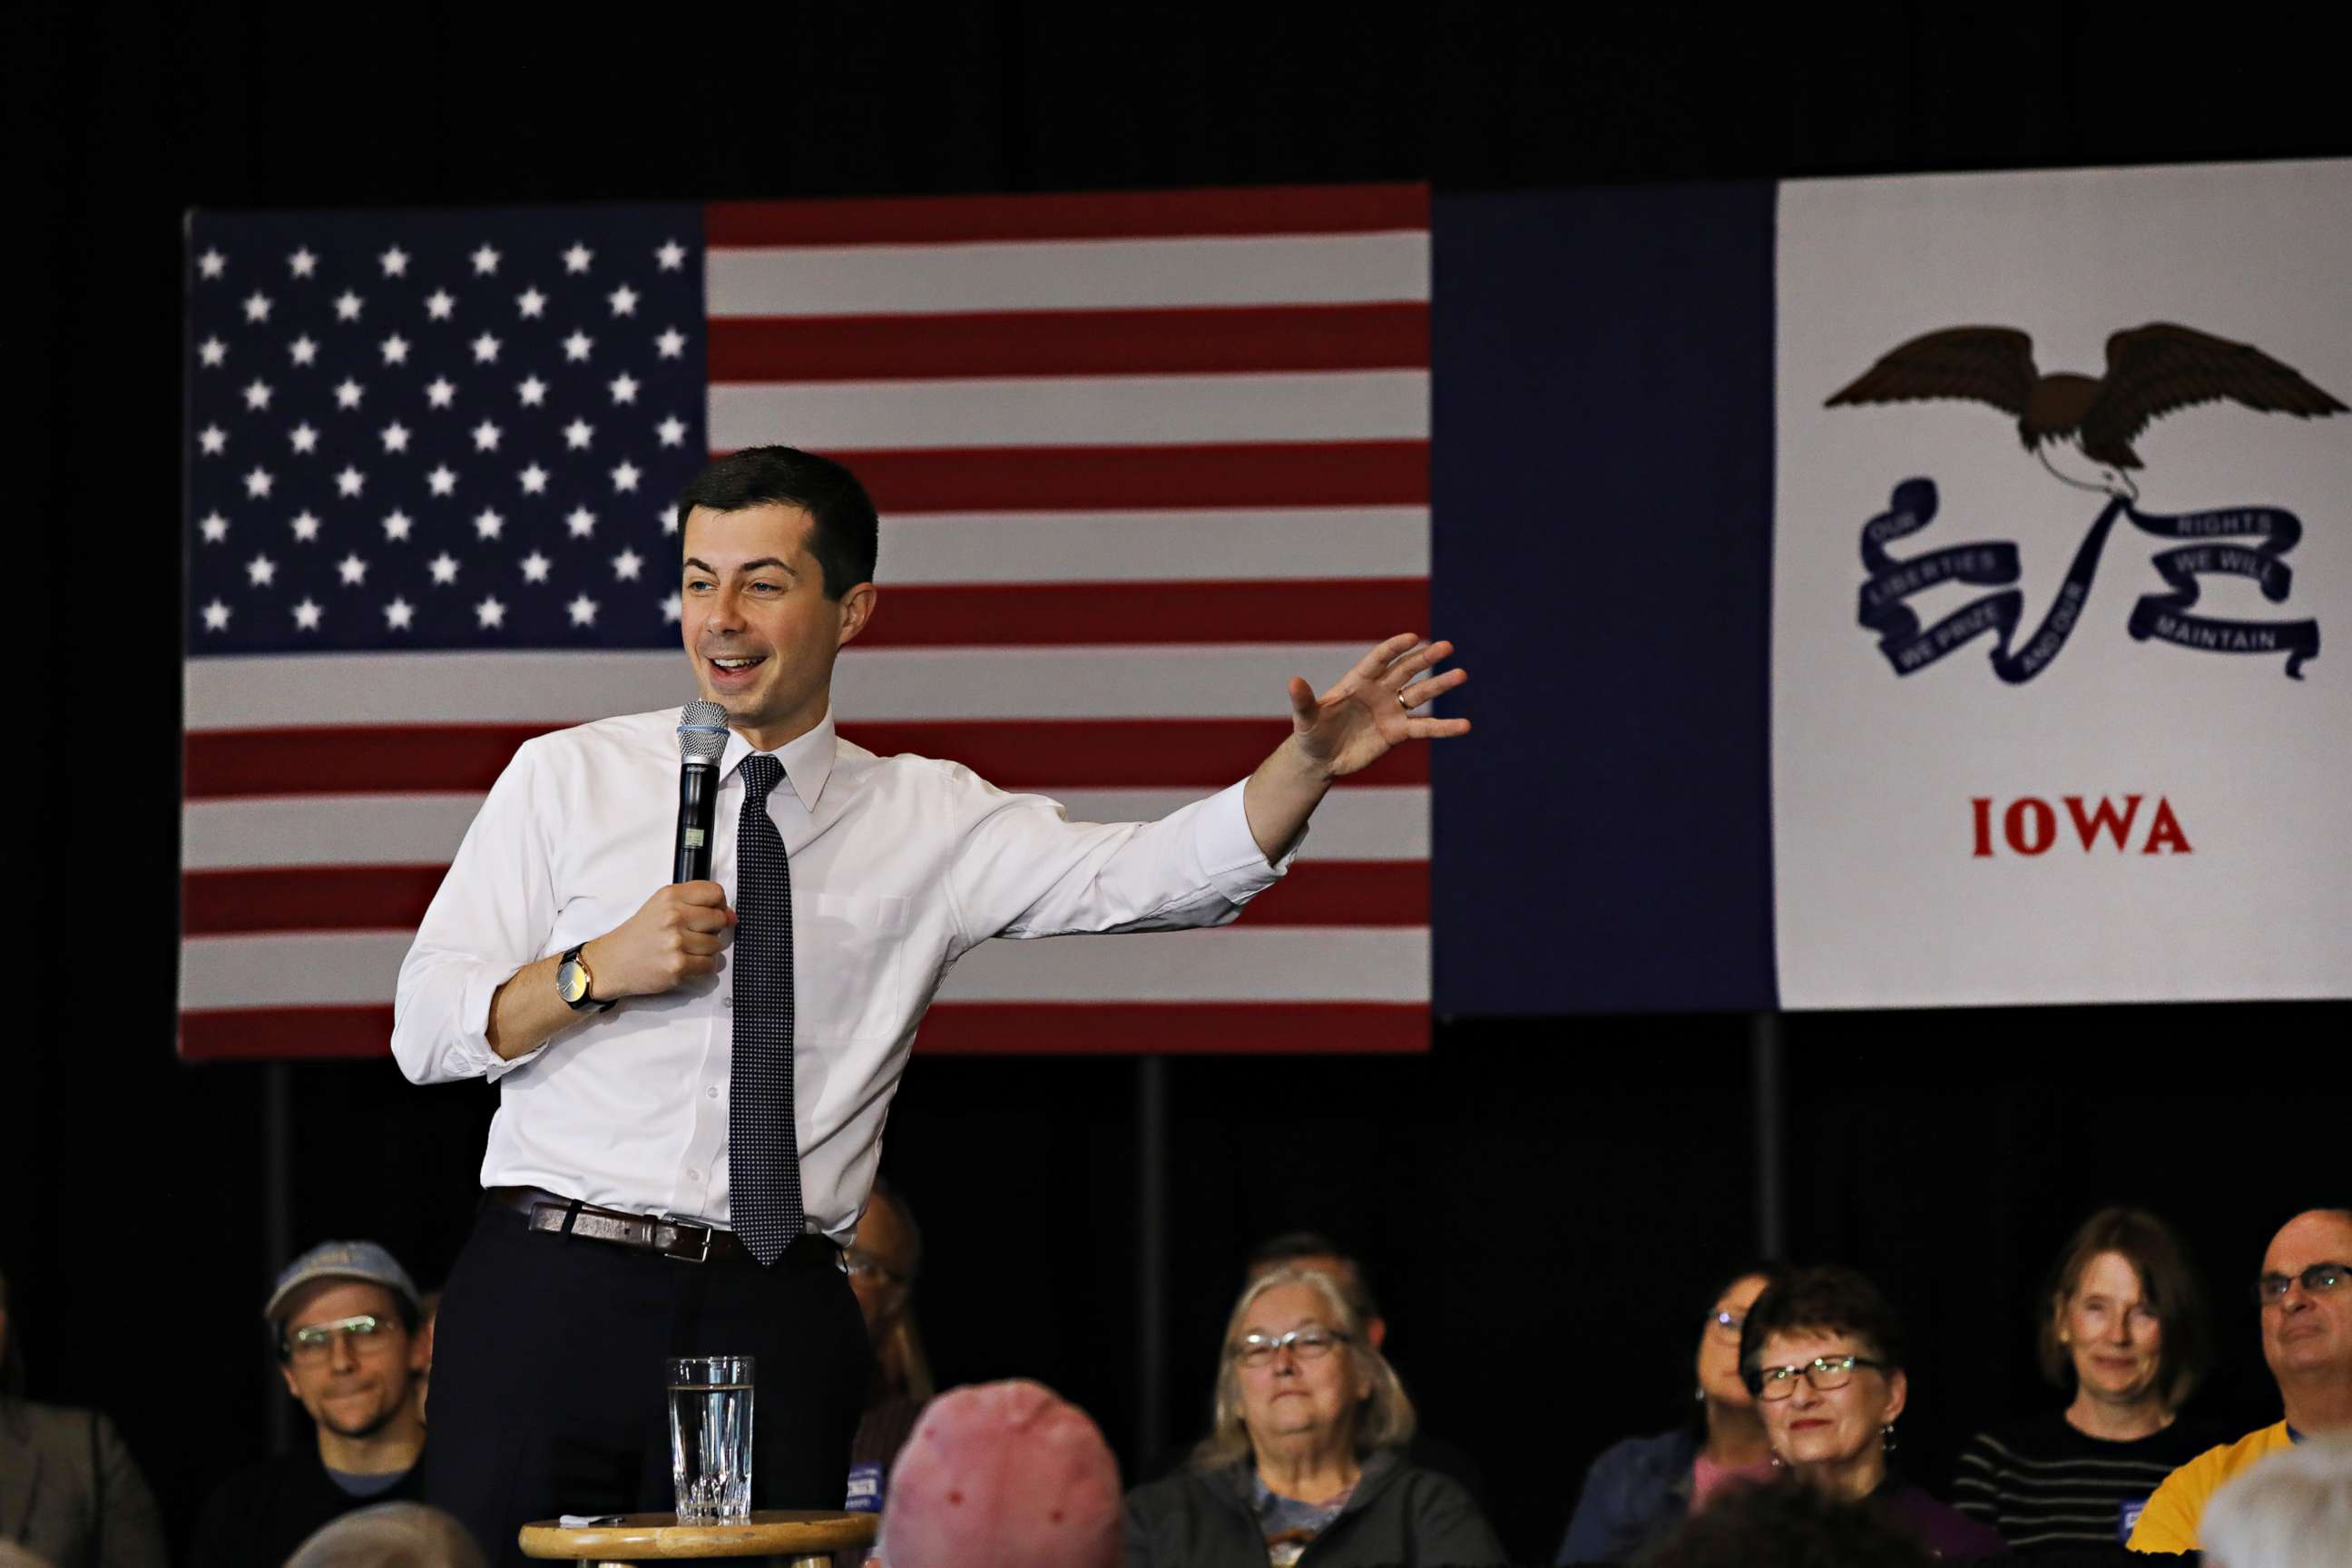 PHOTO: Democratic presidential hopeful former South Bend, Indiana mayor Pete Buttigieg makes a campaign stop at the Ed and Betty Wilcox Performing Arts Center on Jan. 16, 2020 in Algona, Iowa.